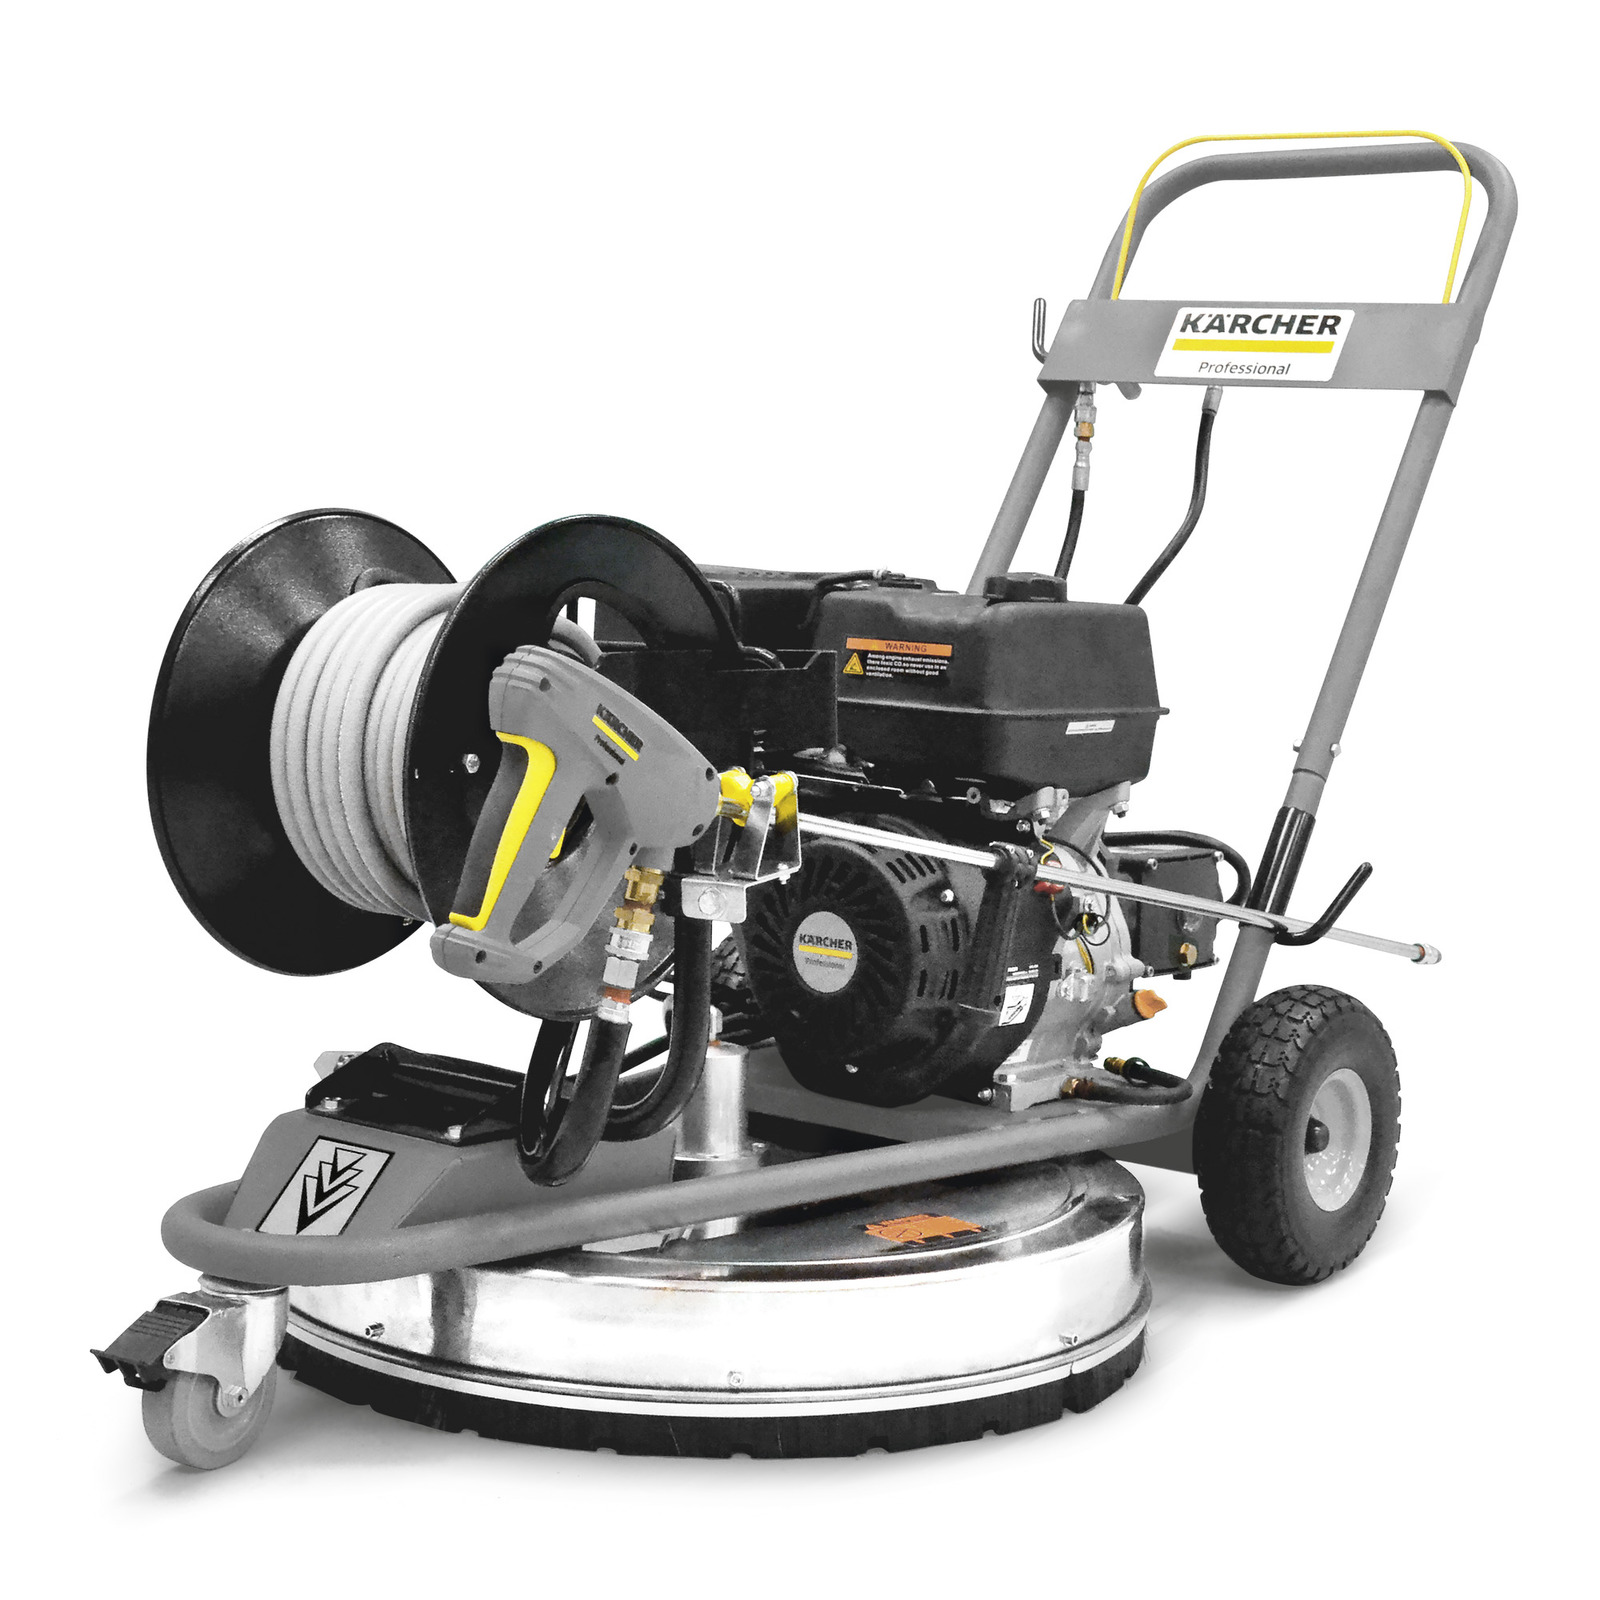 *DEMO* Karcher Jarvis Surface Cleaner/Pressure Washer SCW 4.0/40 G karcher, jarvis, surface, cleaner, pressure, washer, scw 2.4/25 G, cold-water, cold, cleaning, professional, commercial, gas, powered, gasoline, 